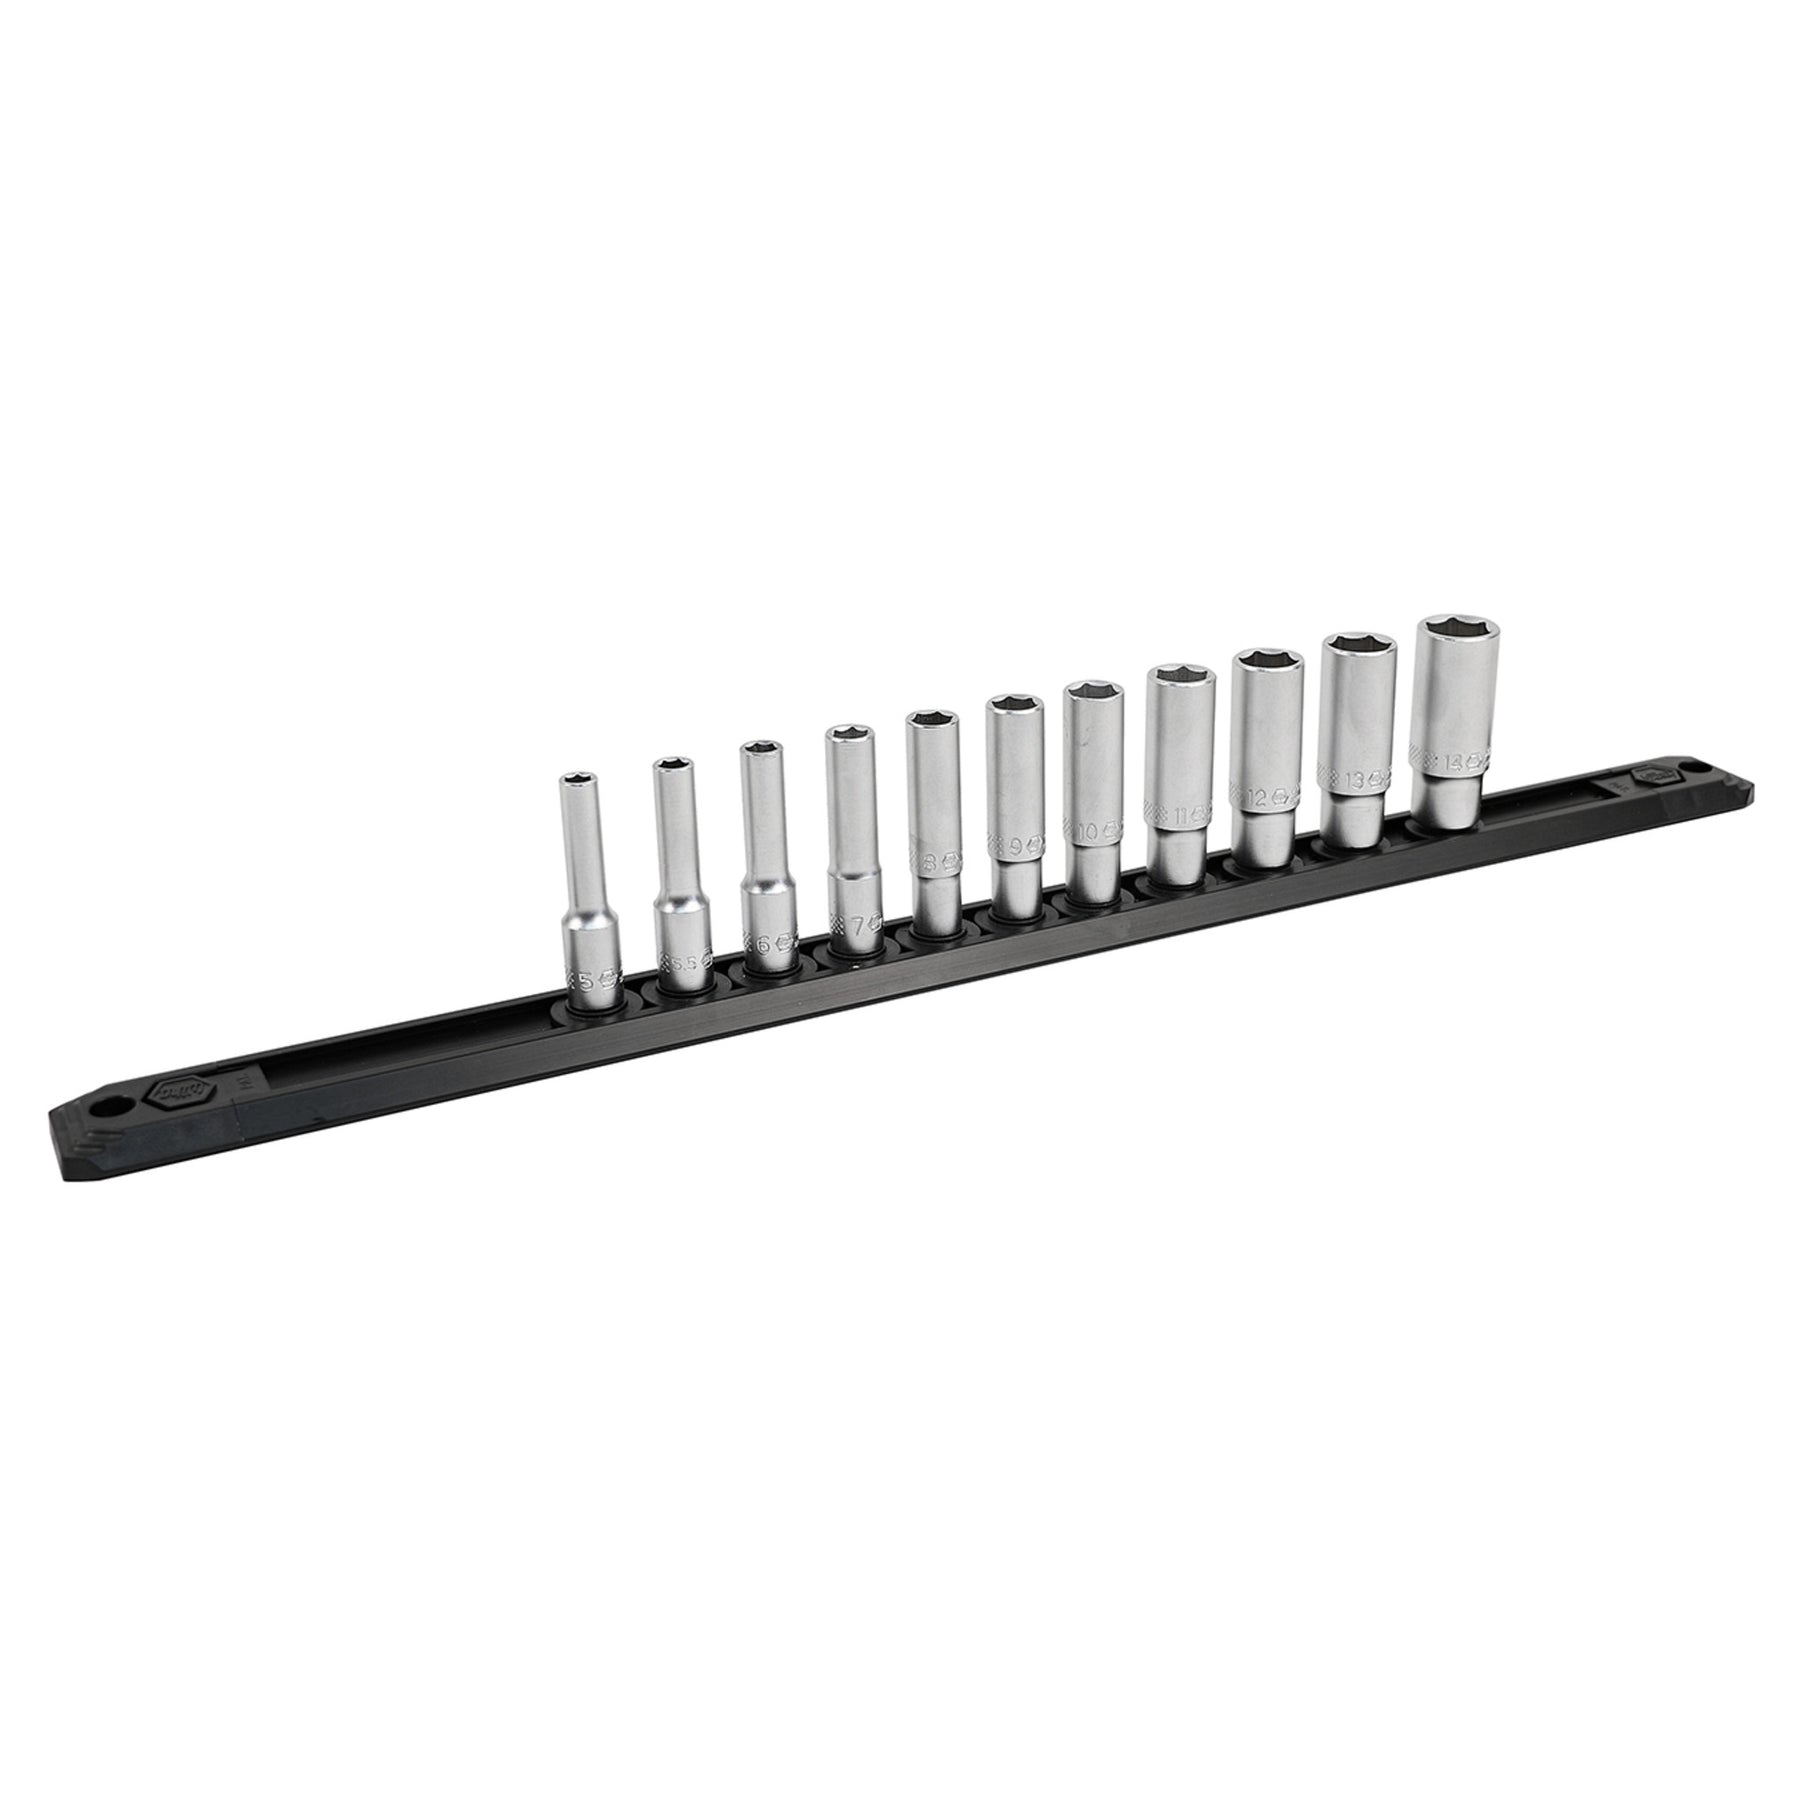 14 Piece Professional Series Socket and Ratchet Set with 3 and 6 Inch Extension Bars - Metric